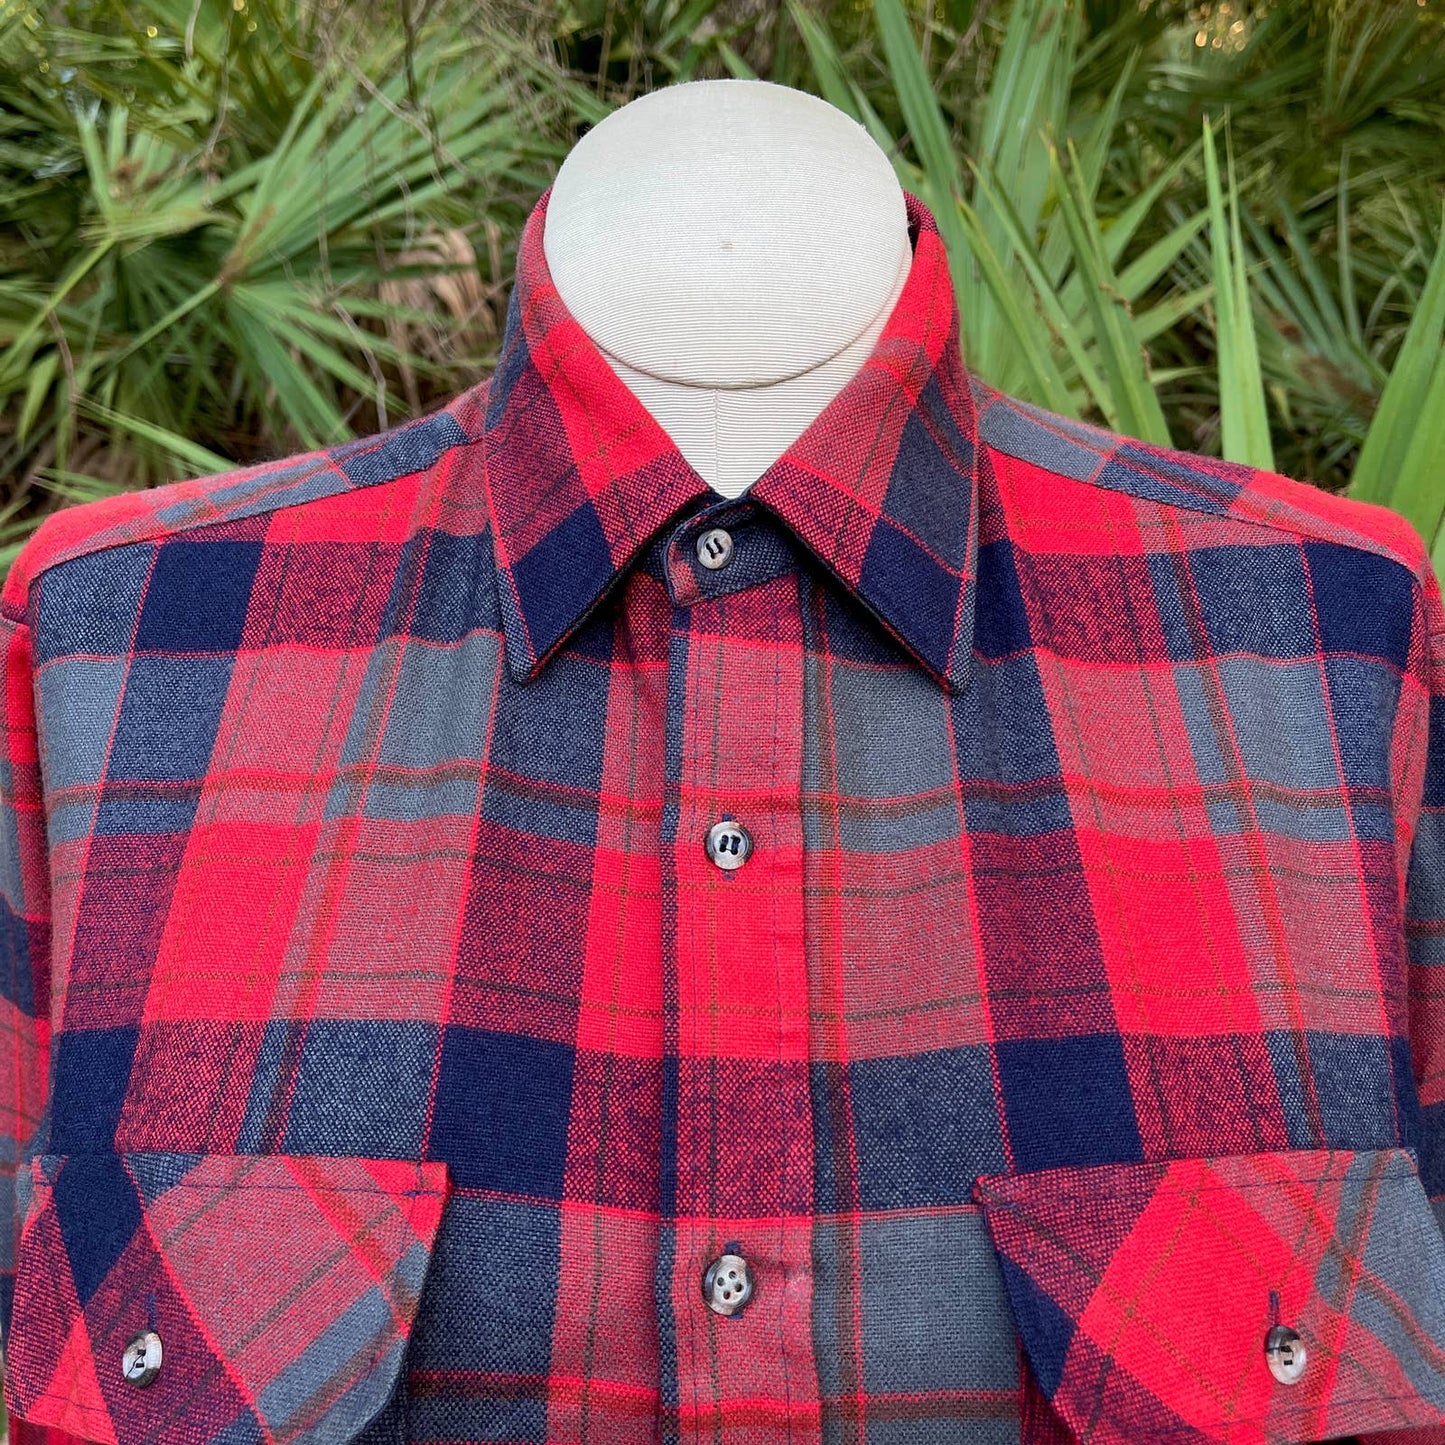 Vintage 90s Plaid Flannel Shirt Red Green Long Sleeve Northwest Territory Size M